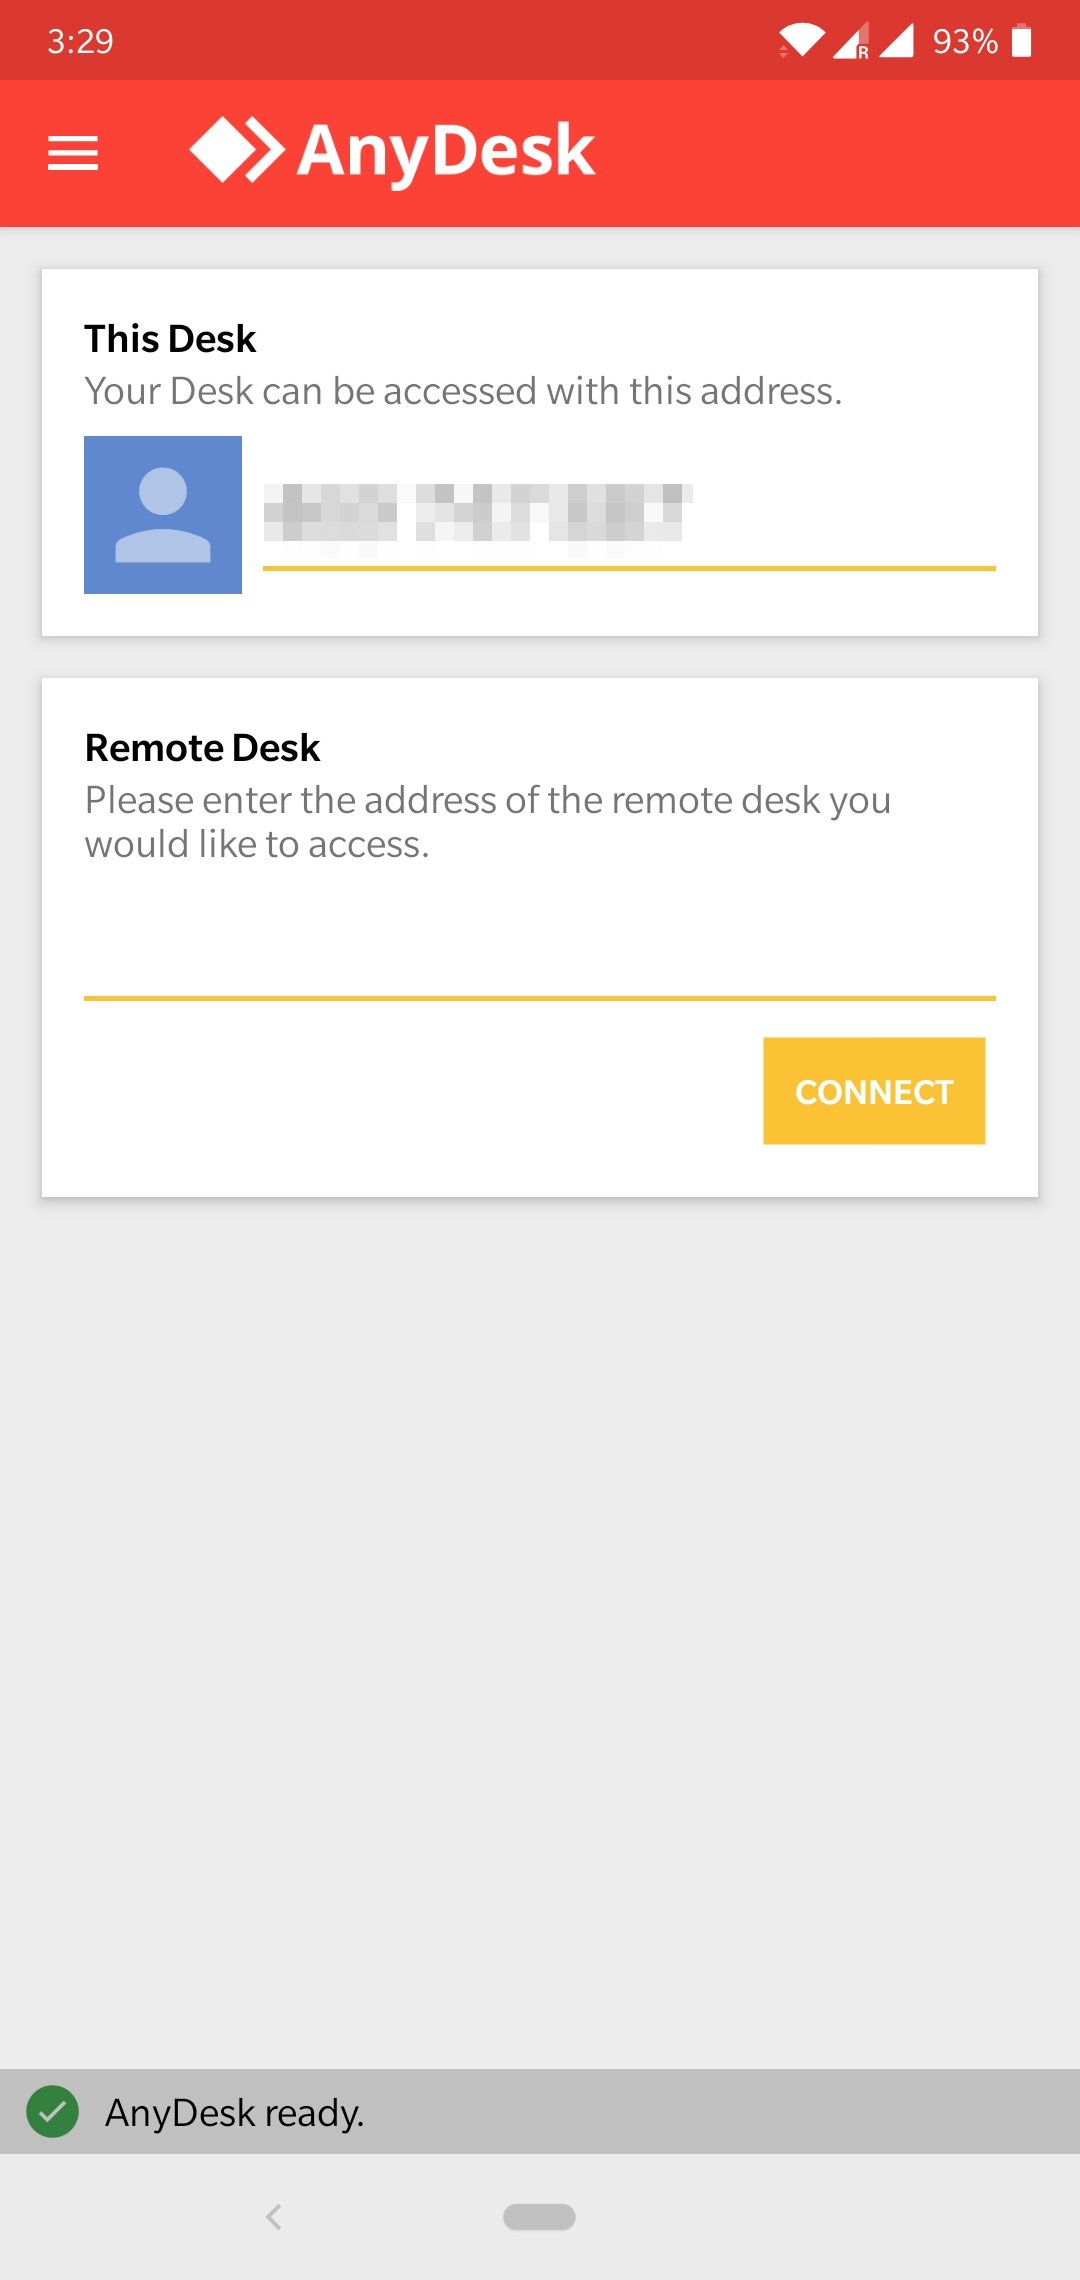 Remotely control your computer with AnyDesk remote PC/Mac control